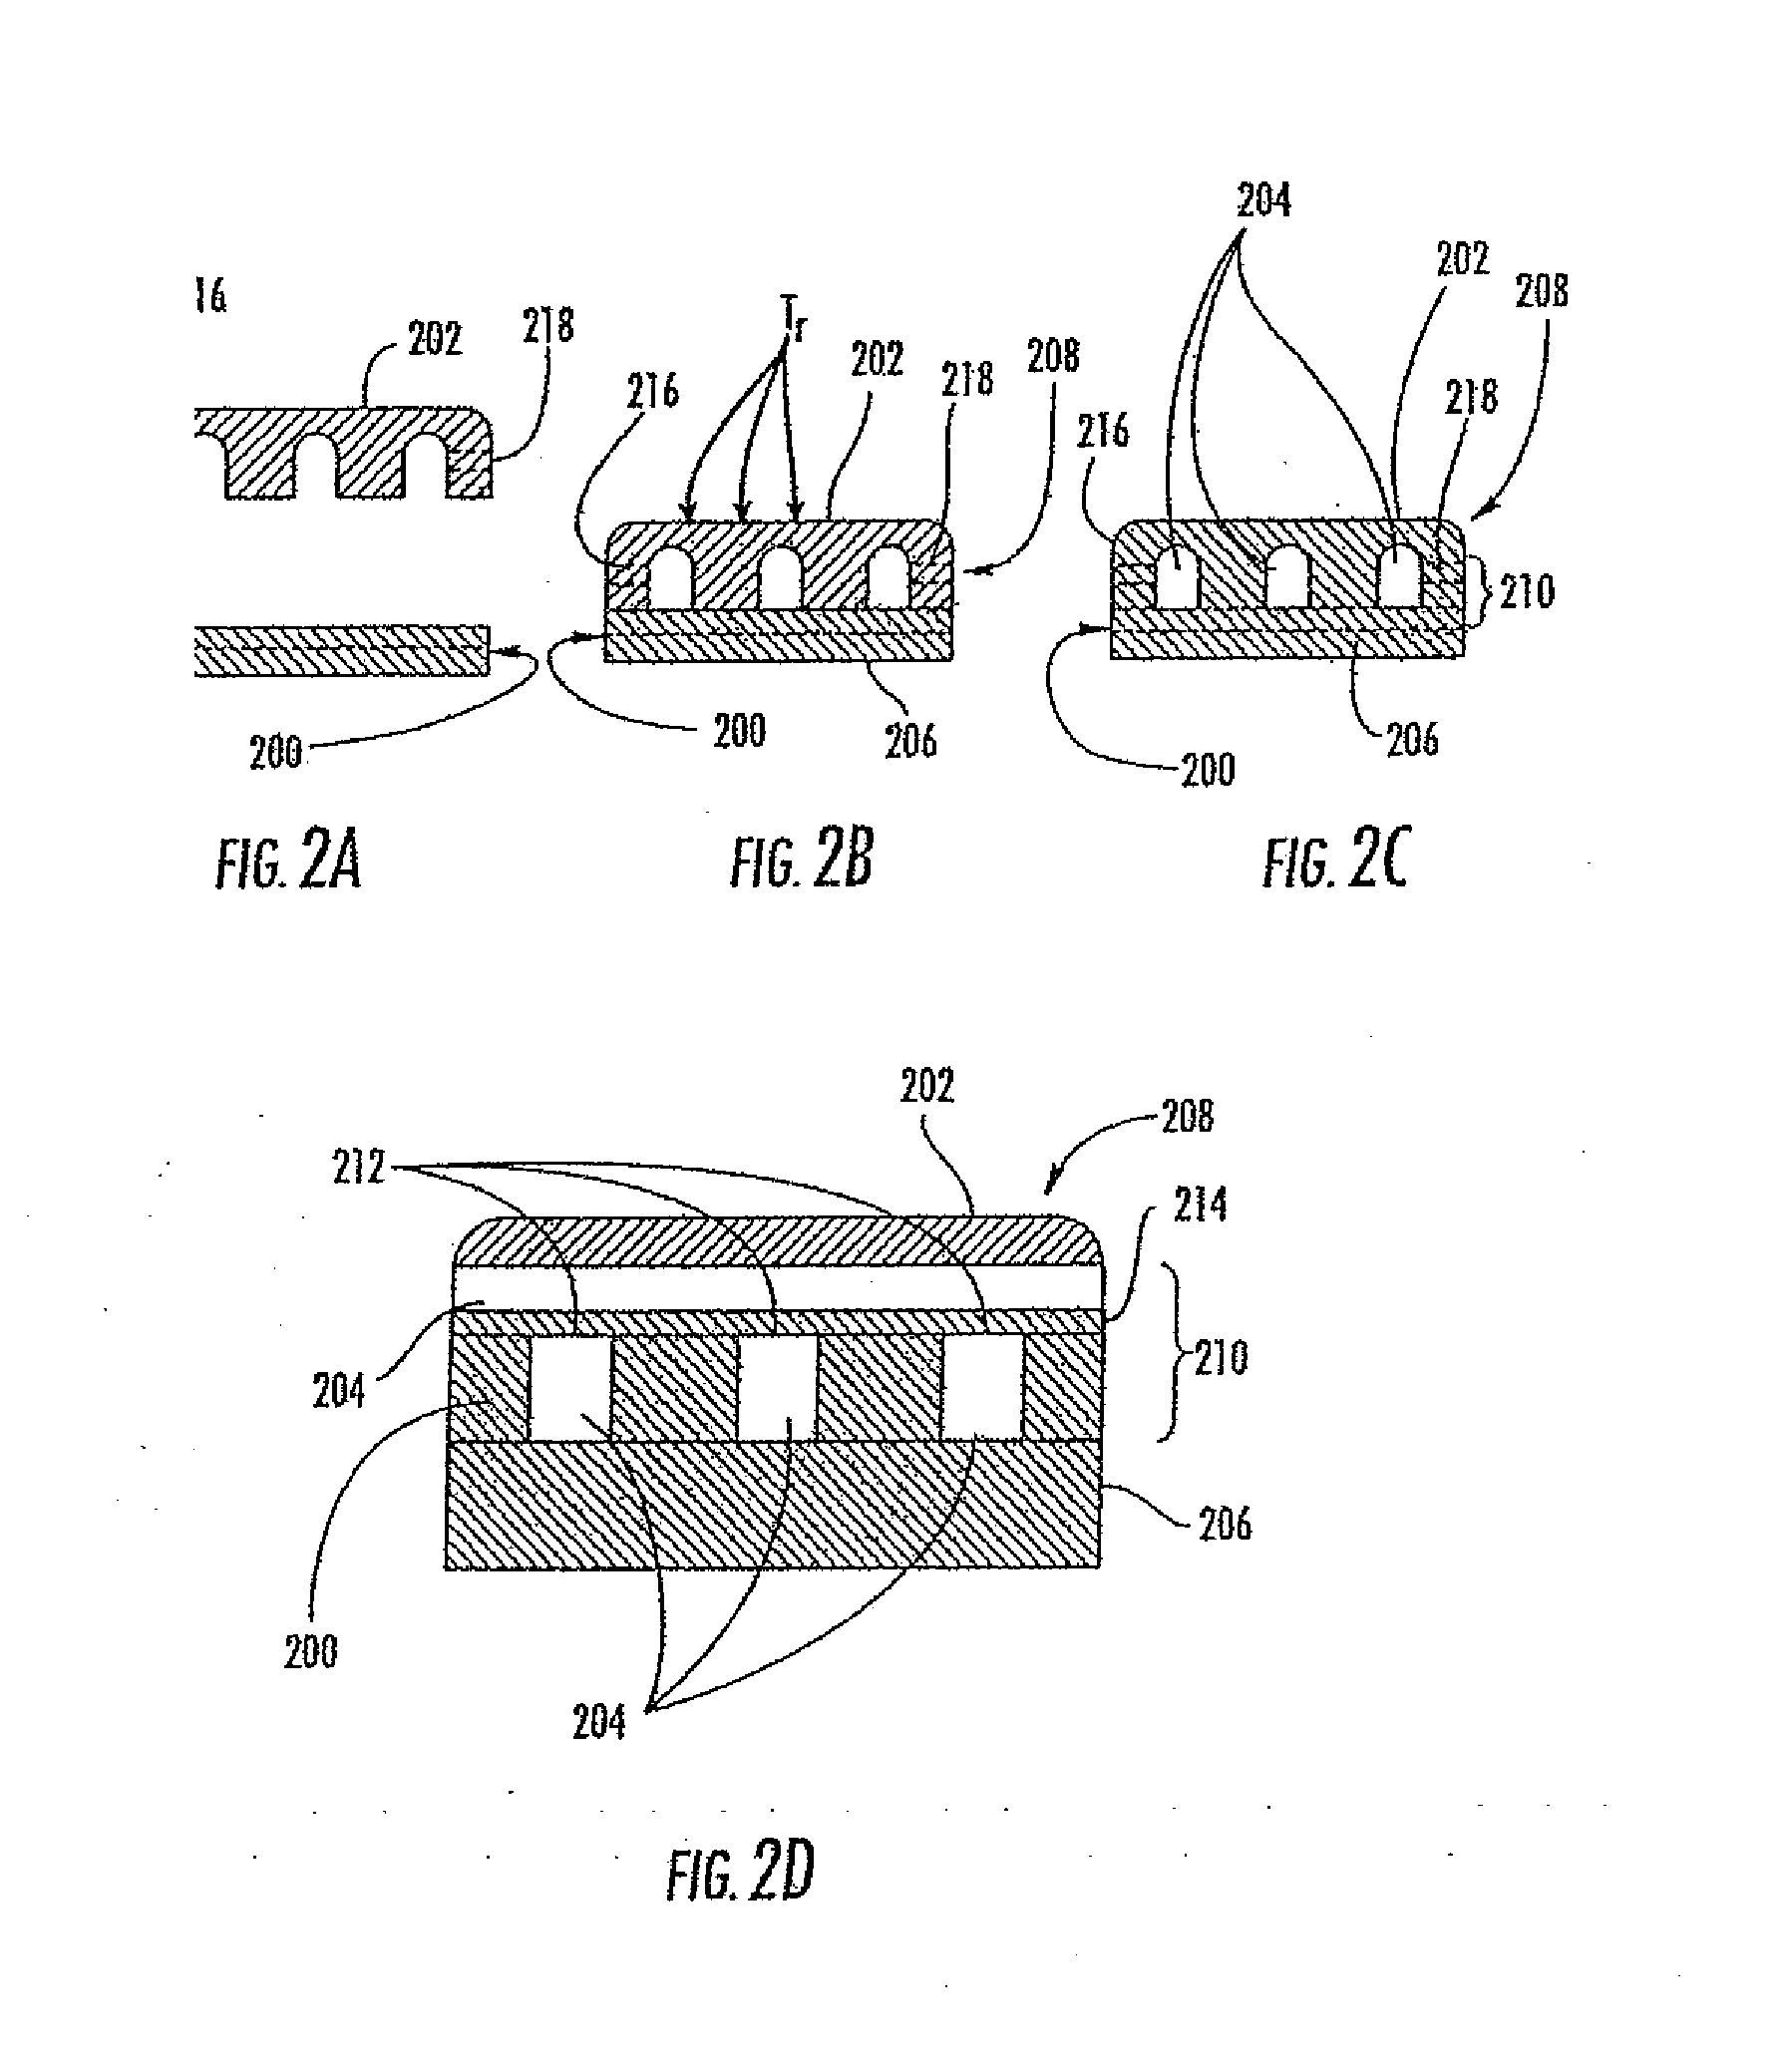 Methods and materials for fabricating microfluidic devices